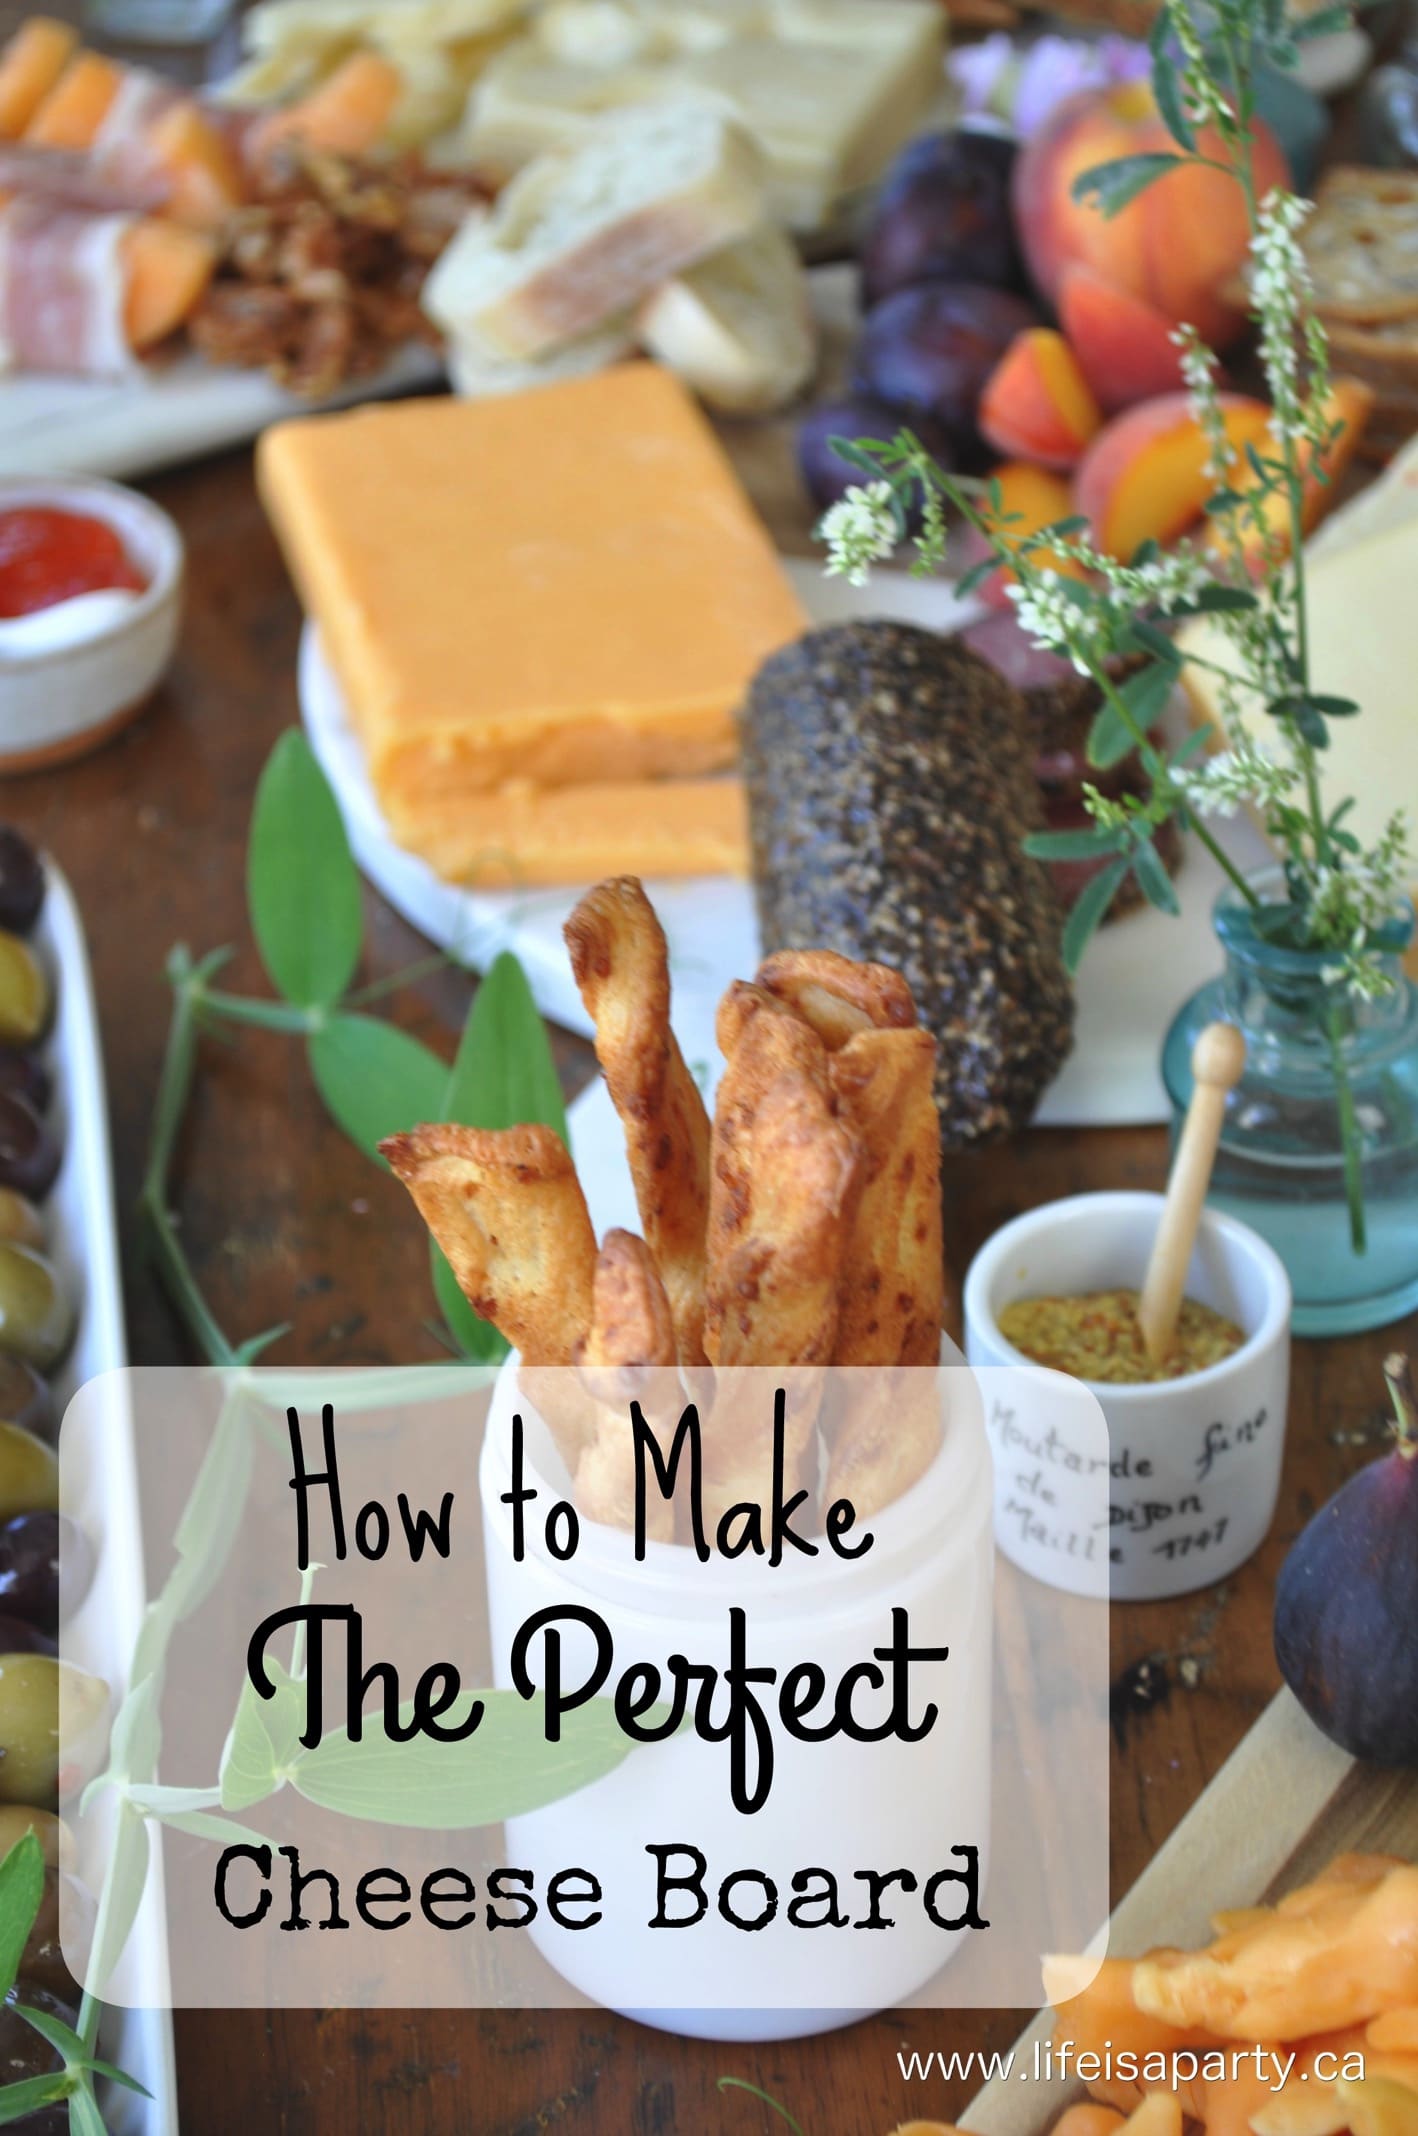 How to Make the Perfect Cheese Board -learn how to combine sweet, salty, sour, spicy, crunch, and creamy to create the perfect cheese board!